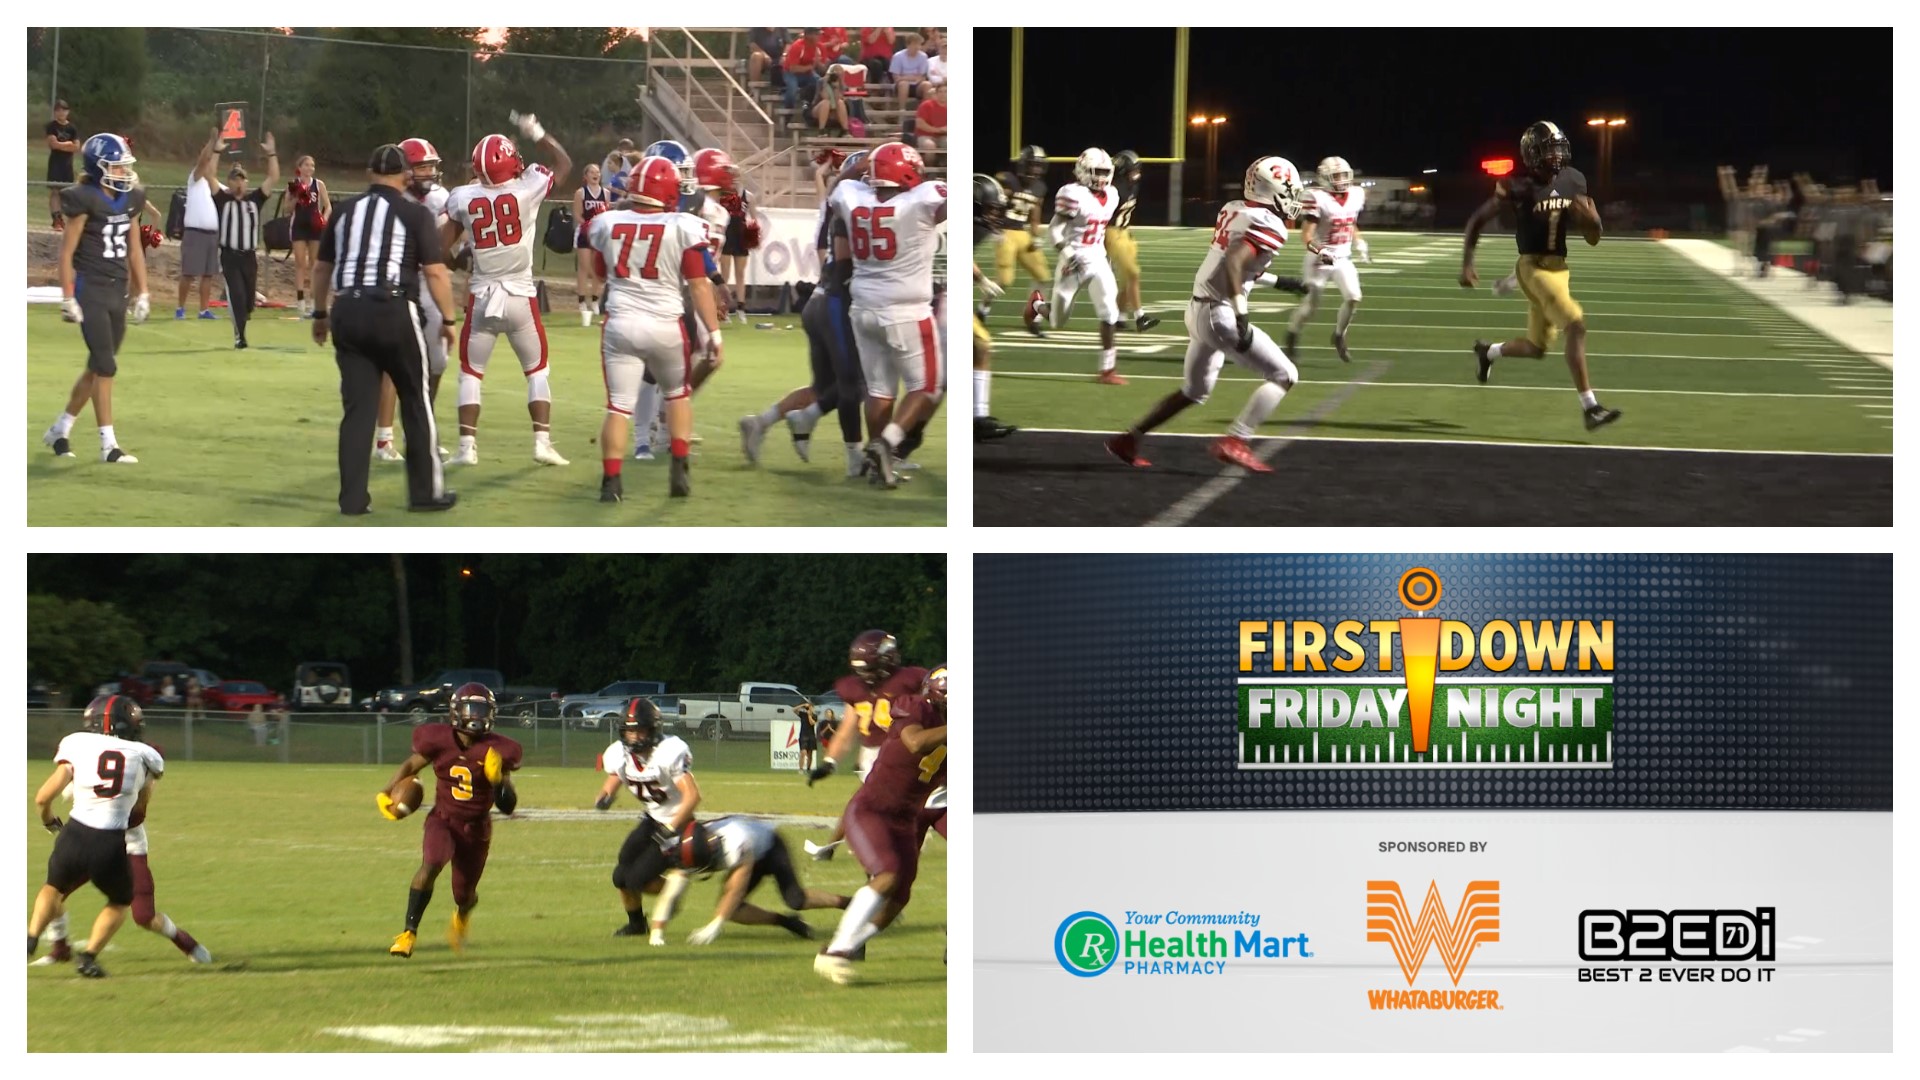 Region play is starting to heat up for all of our teams in the Tennessee Valley. Check out scores and highlights on the Week 3 edition of First Down Friday Night